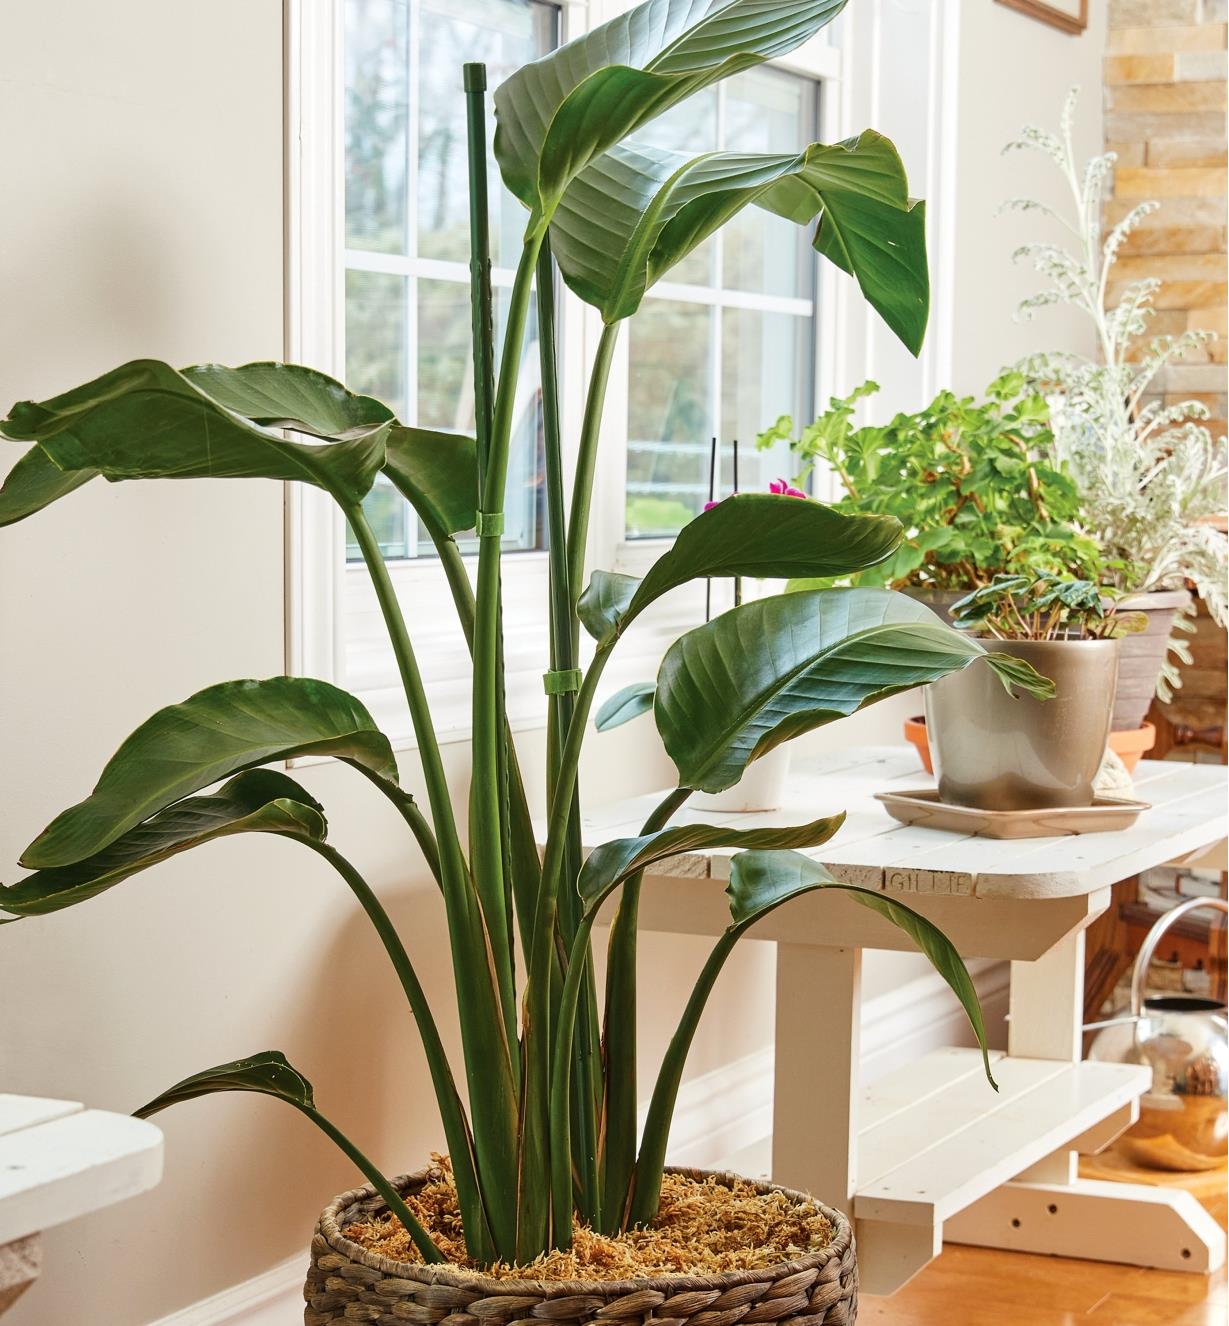 Green permanent stakes help to support a large houseplant in a basket.